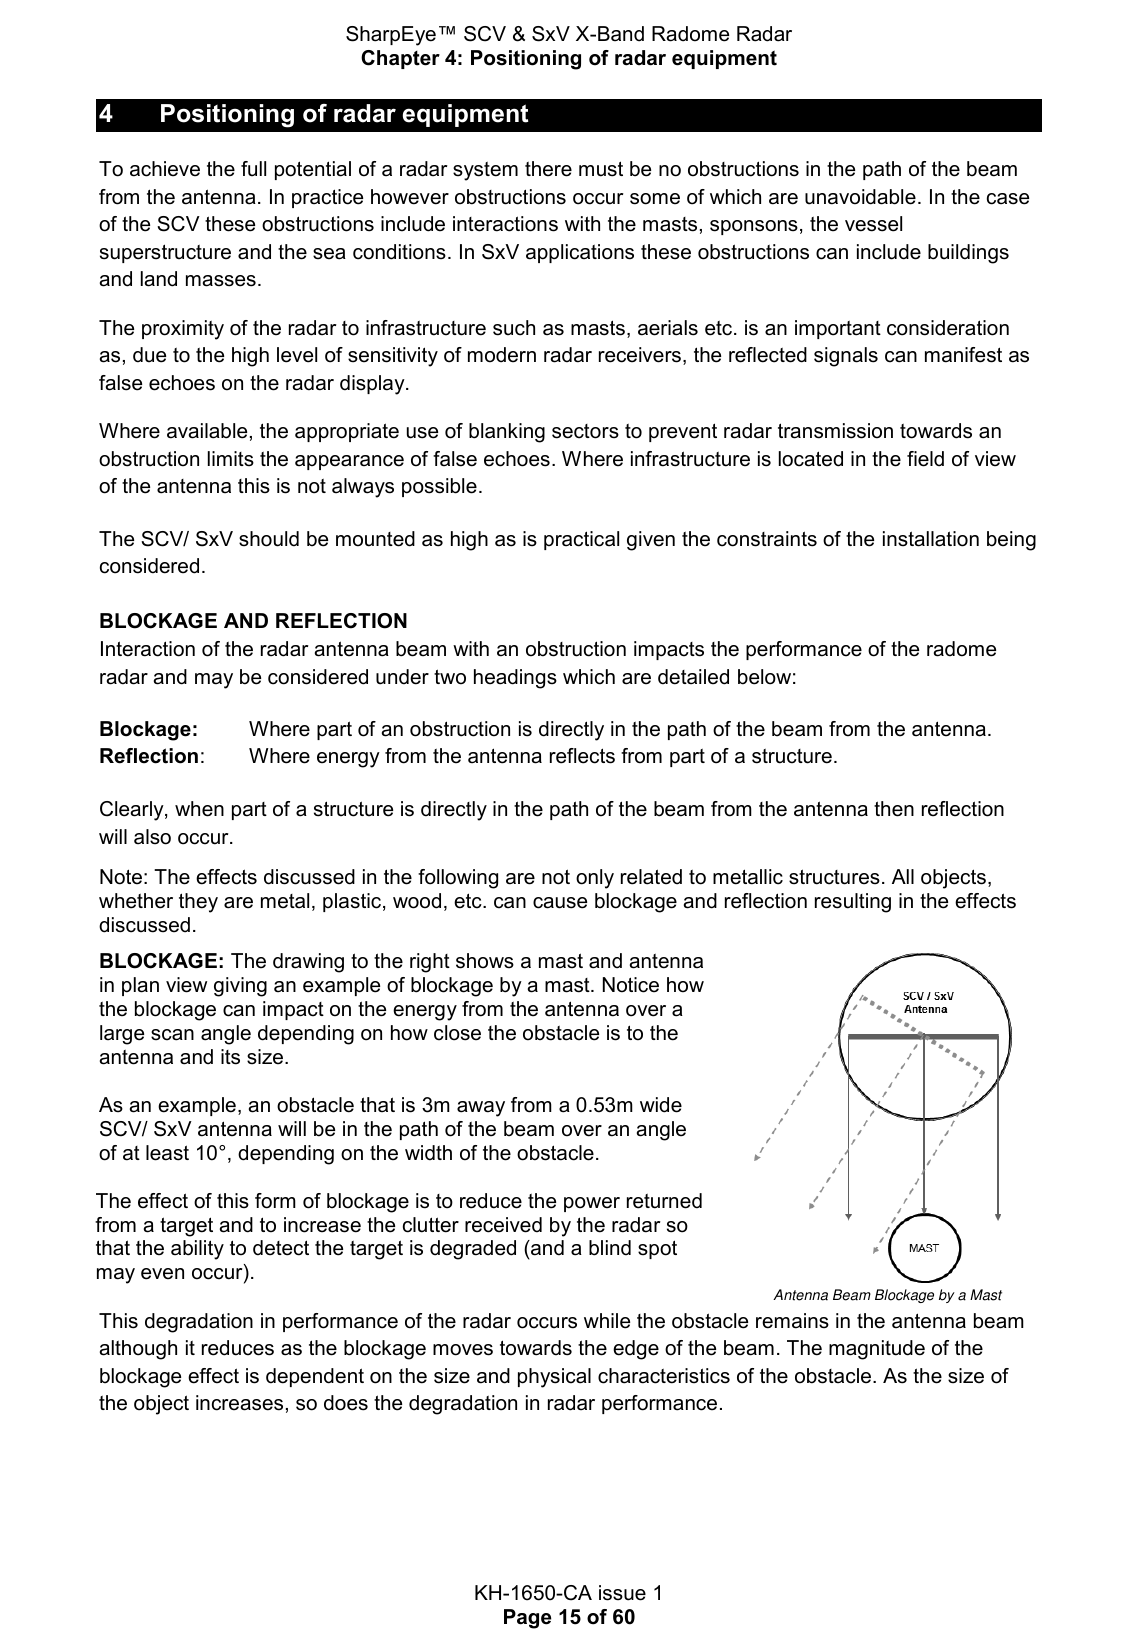 SharpEye™ SCV &amp; SxV X-Band Radome Radar Chapter 4: Positioning of radar equipment  KH-1650-CA issue 1 Page 15 of 60 4  Positioning of radar equipment To achieve the full potential of a radar system there must be no obstructions in the path of the beam from the antenna. In practice however obstructions occur some of which are unavoidable. In the case of the SCV these obstructions include interactions with the masts, sponsons, the vessel superstructure and the sea conditions. In SxV applications these obstructions can include buildings and land masses. The proximity of the radar to infrastructure such as masts, aerials etc. is an important consideration as, due to the high level of sensitivity of modern radar receivers, the reflected signals can manifest as false echoes on the radar display. Where available, the appropriate use of blanking sectors to prevent radar transmission towards an obstruction limits the appearance of false echoes. Where infrastructure is located in the field of view of the antenna this is not always possible. The SCV/ SxV should be mounted as high as is practical given the constraints of the installation being considered.  BLOCKAGE AND REFLECTION Interaction of the radar antenna beam with an obstruction impacts the performance of the radome radar and may be considered under two headings which are detailed below: Blockage:    Where part of an obstruction is directly in the path of the beam from the antenna. Reflection:   Where energy from the antenna reflects from part of a structure. Clearly, when part of a structure is directly in the path of the beam from the antenna then reflection will also occur. Note: The effects discussed in the following are not only related to metallic structures. All objects, whether they are metal, plastic, wood, etc. can cause blockage and reflection resulting in the effects discussed. BLOCKAGE: The drawing to the right shows a mast and antenna in plan view giving an example of blockage by a mast. Notice how the blockage can impact on the energy from the antenna over a large scan angle depending on how close the obstacle is to the antenna and its size.   As an example, an obstacle that is 3m away from a 0.53m wide SCV/ SxV antenna will be in the path of the beam over an angle of at least 10°, depending on the width of the obstacle.  The effect of this form of blockage is to reduce the power returned from a target and to increase the clutter received by the radar so that the ability to detect the target is degraded (and a blind spot may even occur).               Antenna Beam Blockage by a Mast This degradation in performance of the radar occurs while the obstacle remains in the antenna beam although it reduces as the blockage moves towards the edge of the beam. The magnitude of the blockage effect is dependent on the size and physical characteristics of the obstacle. As the size of the object increases, so does the degradation in radar performance.  